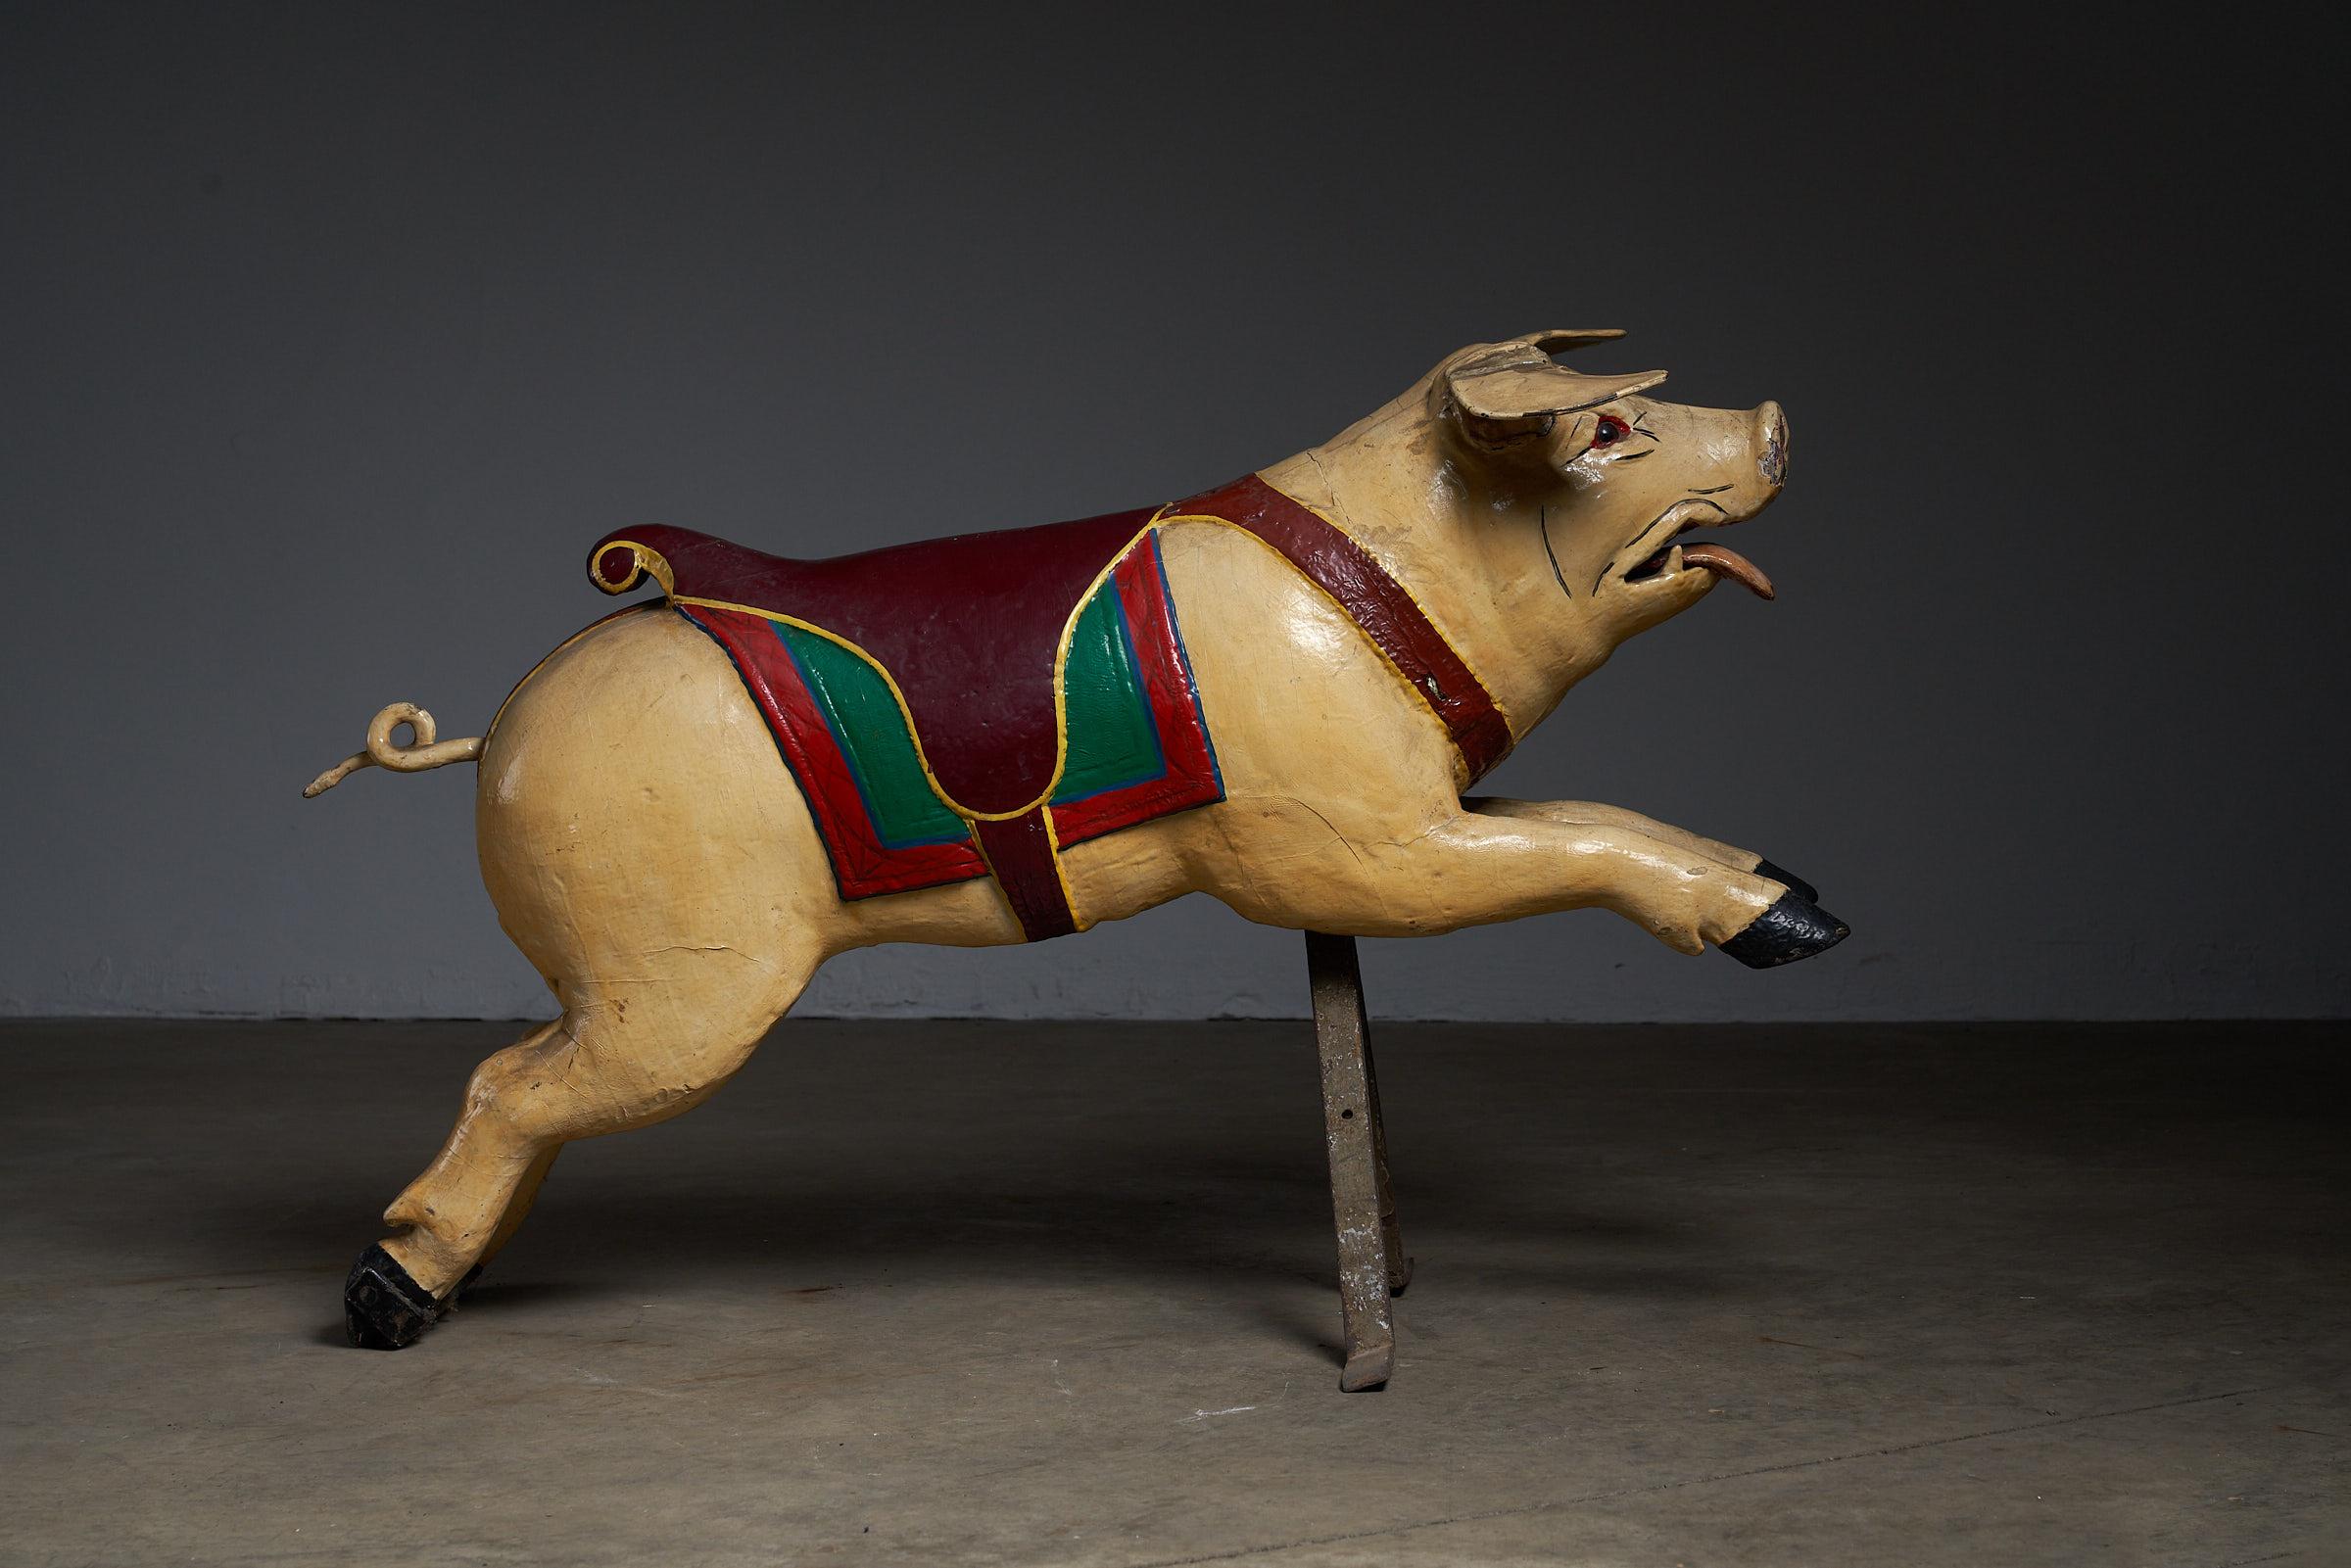 Add a touch of whimsy to your space with this charming antique carousel figure featuring a carved wooden pig. Crafted with precision and mounted on a sturdy metal base, this carousel piece showcases the craftsmanship of yesteryears. Perfect for